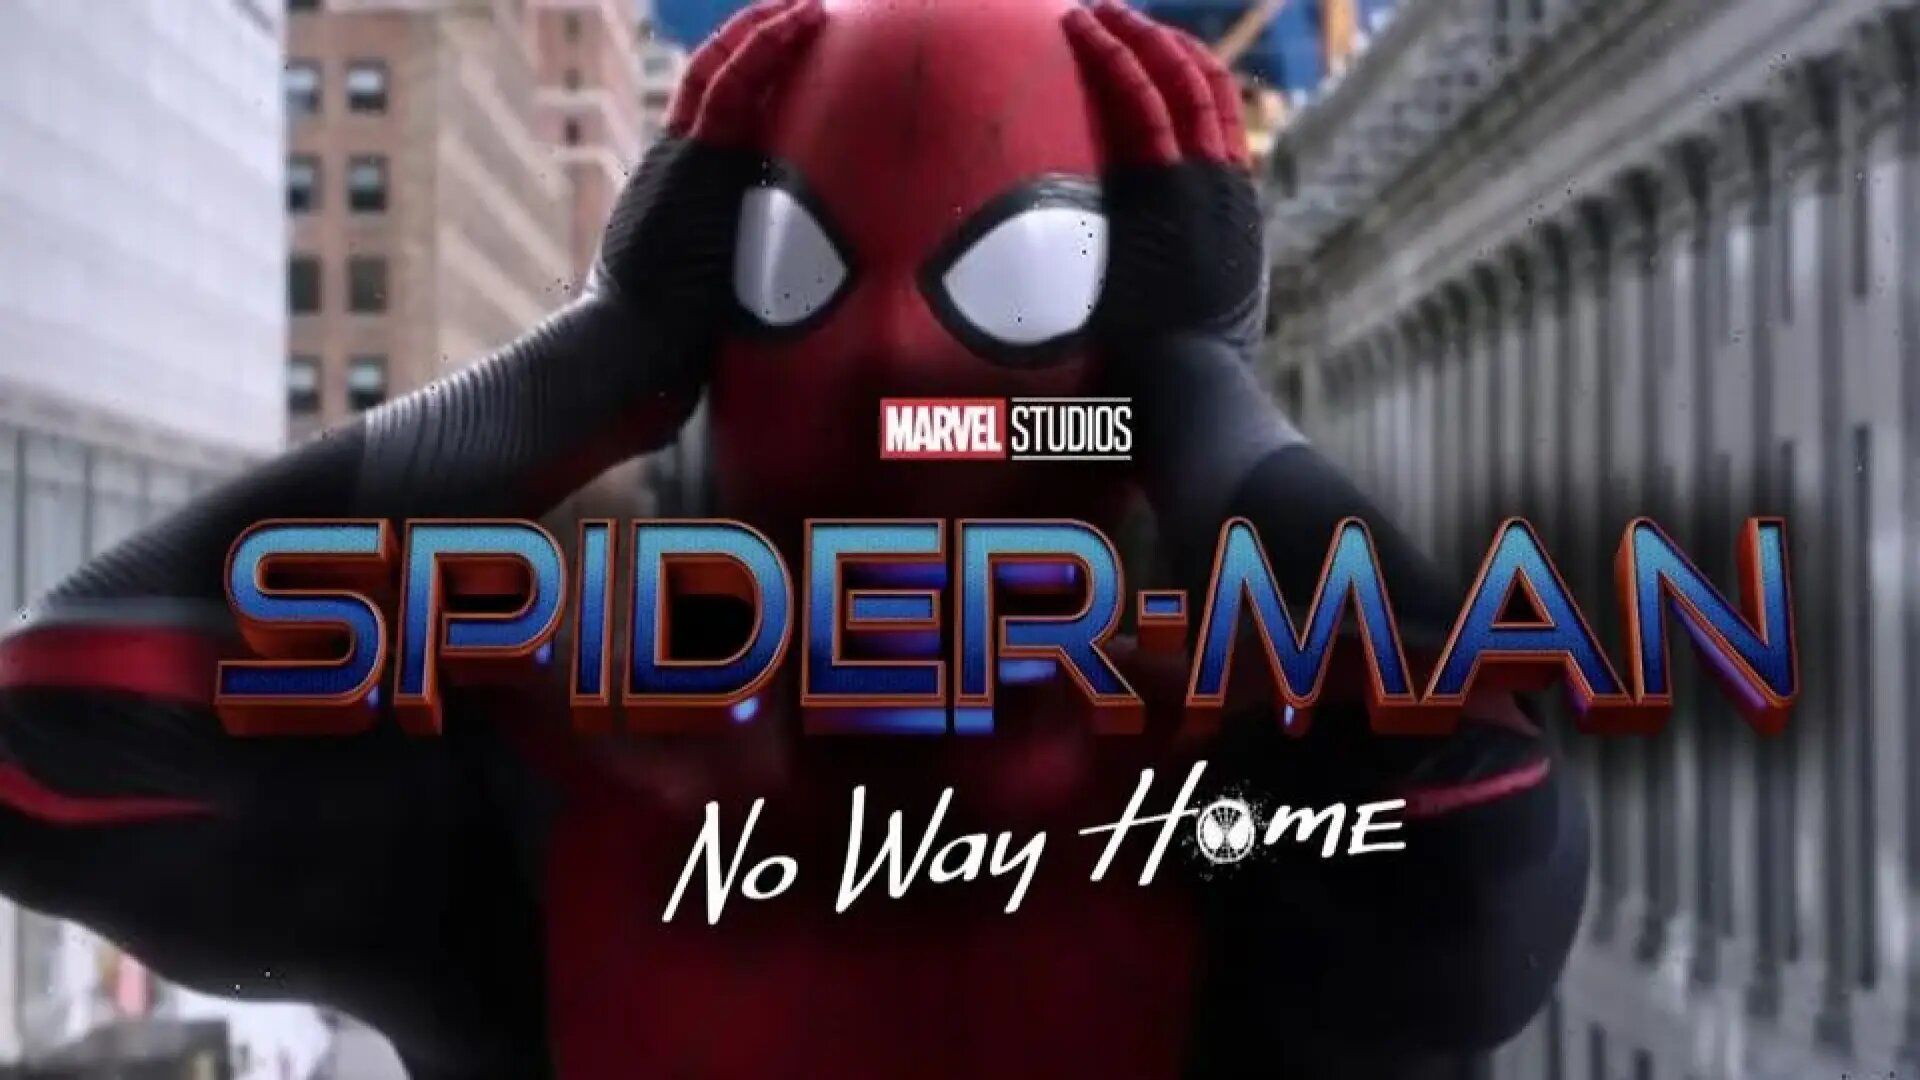 No Way Home, what does the title mean and what does the Multiverse have to do with it?